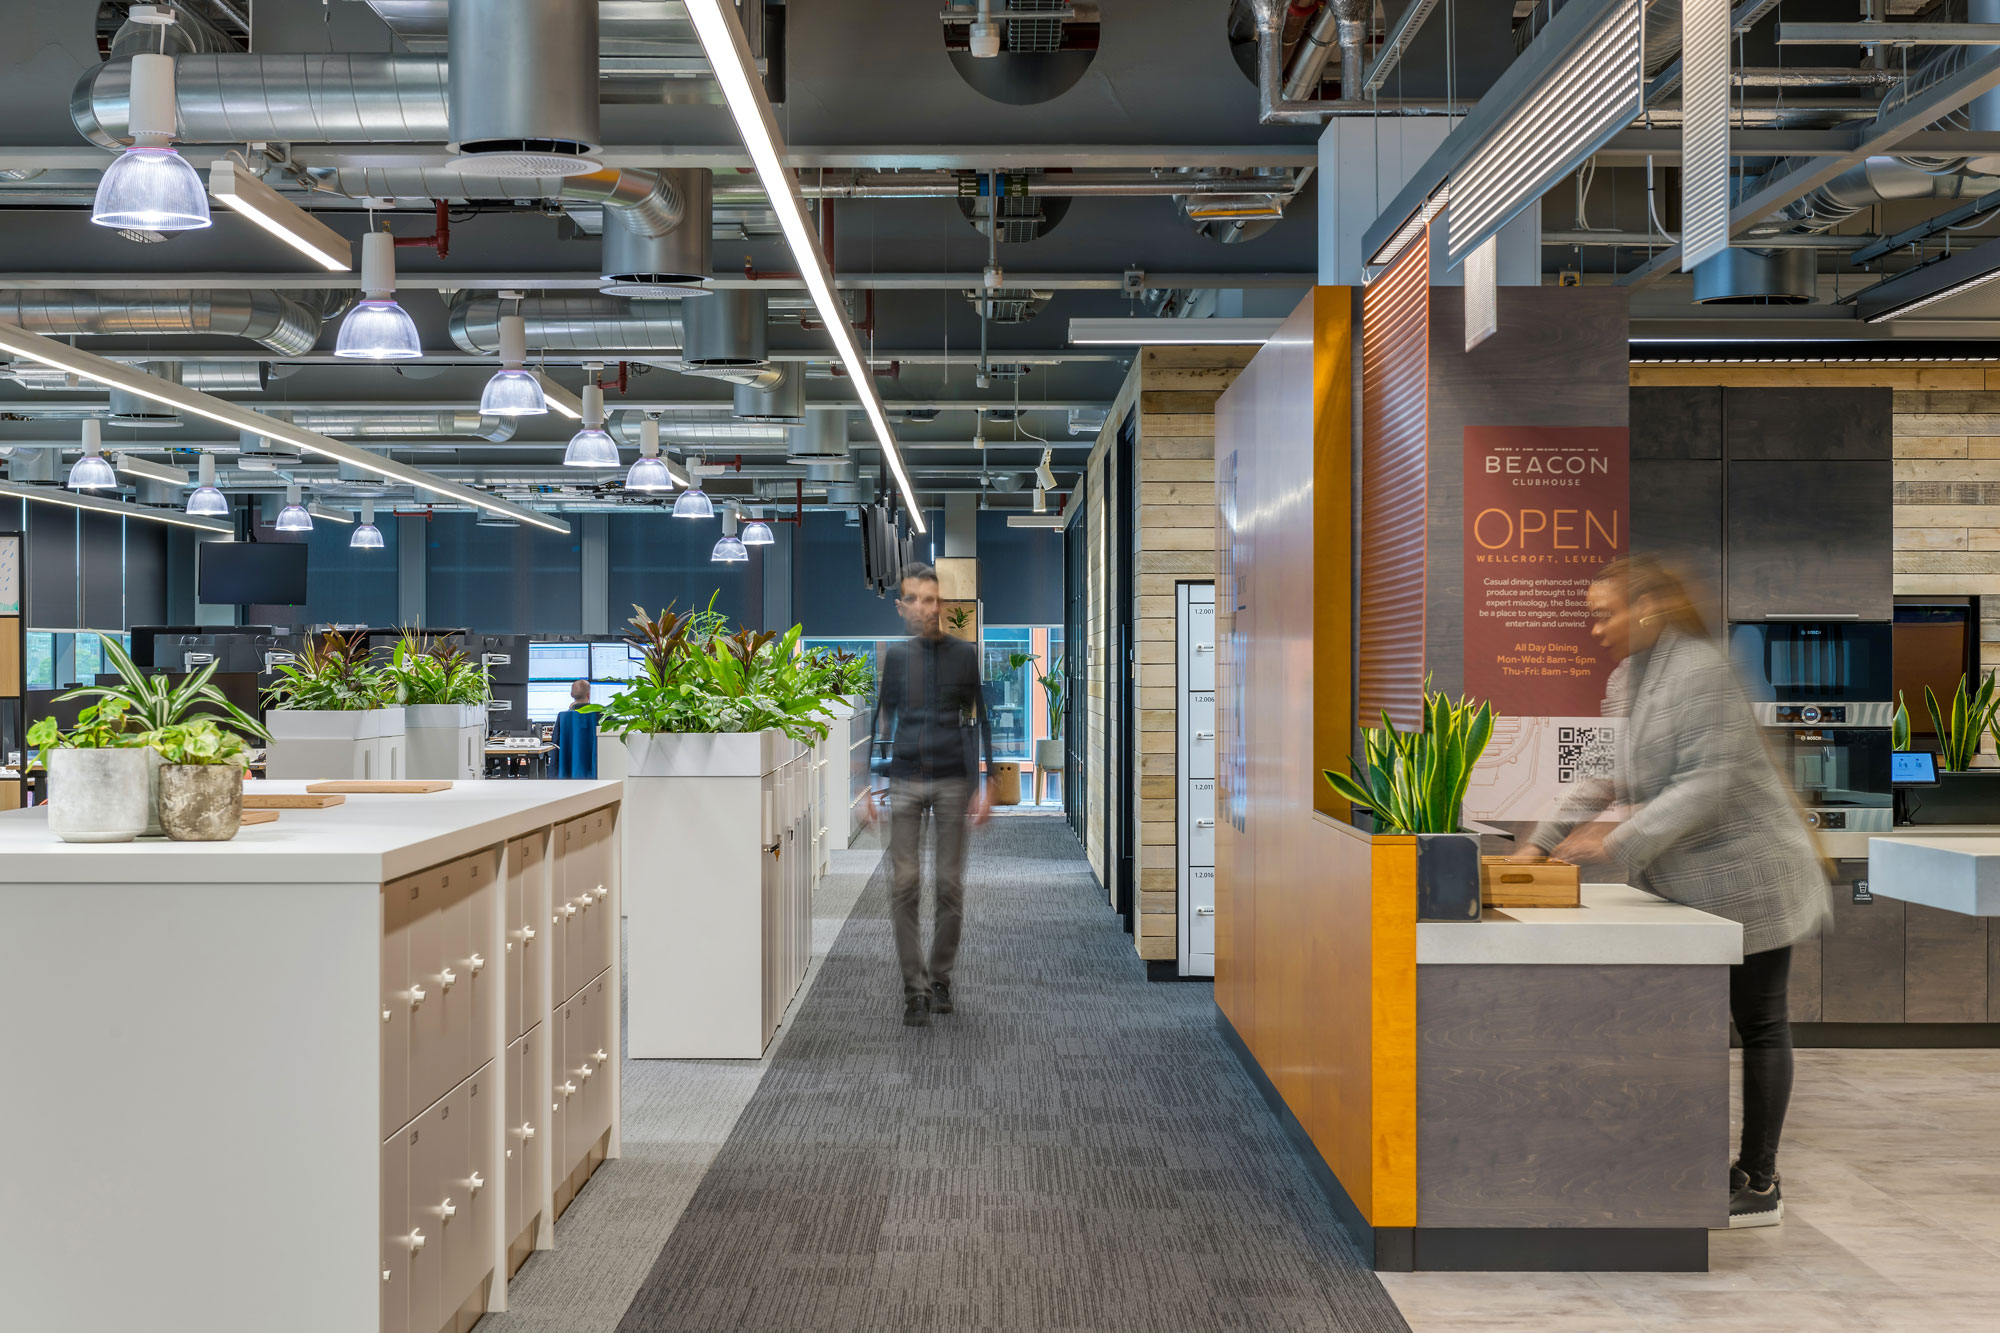 Barclays' open plan office with clear zoning, including a kitchenette area with lowered worksurfaces